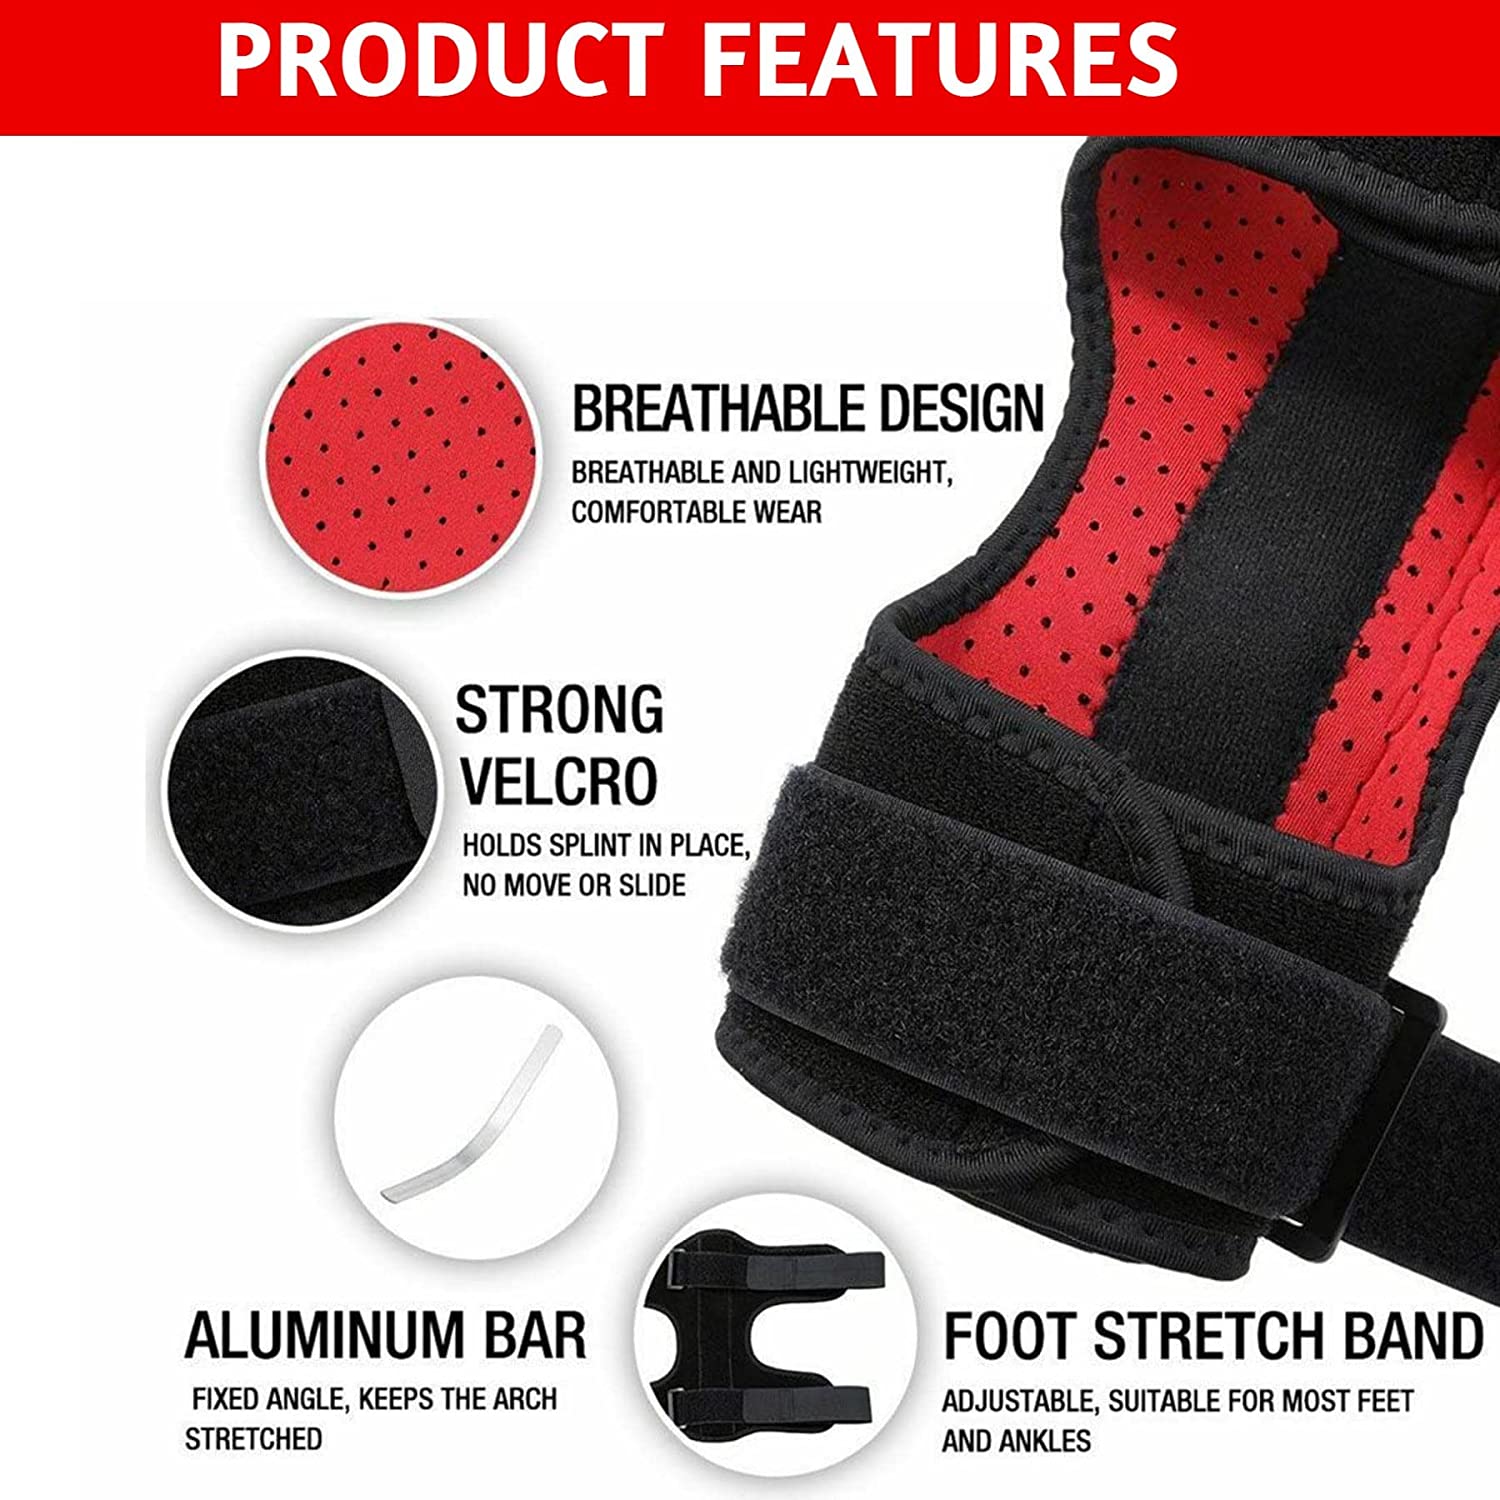 Plantar Fasciitis Night Splint for Heel Pain Relief - Foot Drop Orthotic Brace for Sleep Support, Fits for Both Left and Right Foot